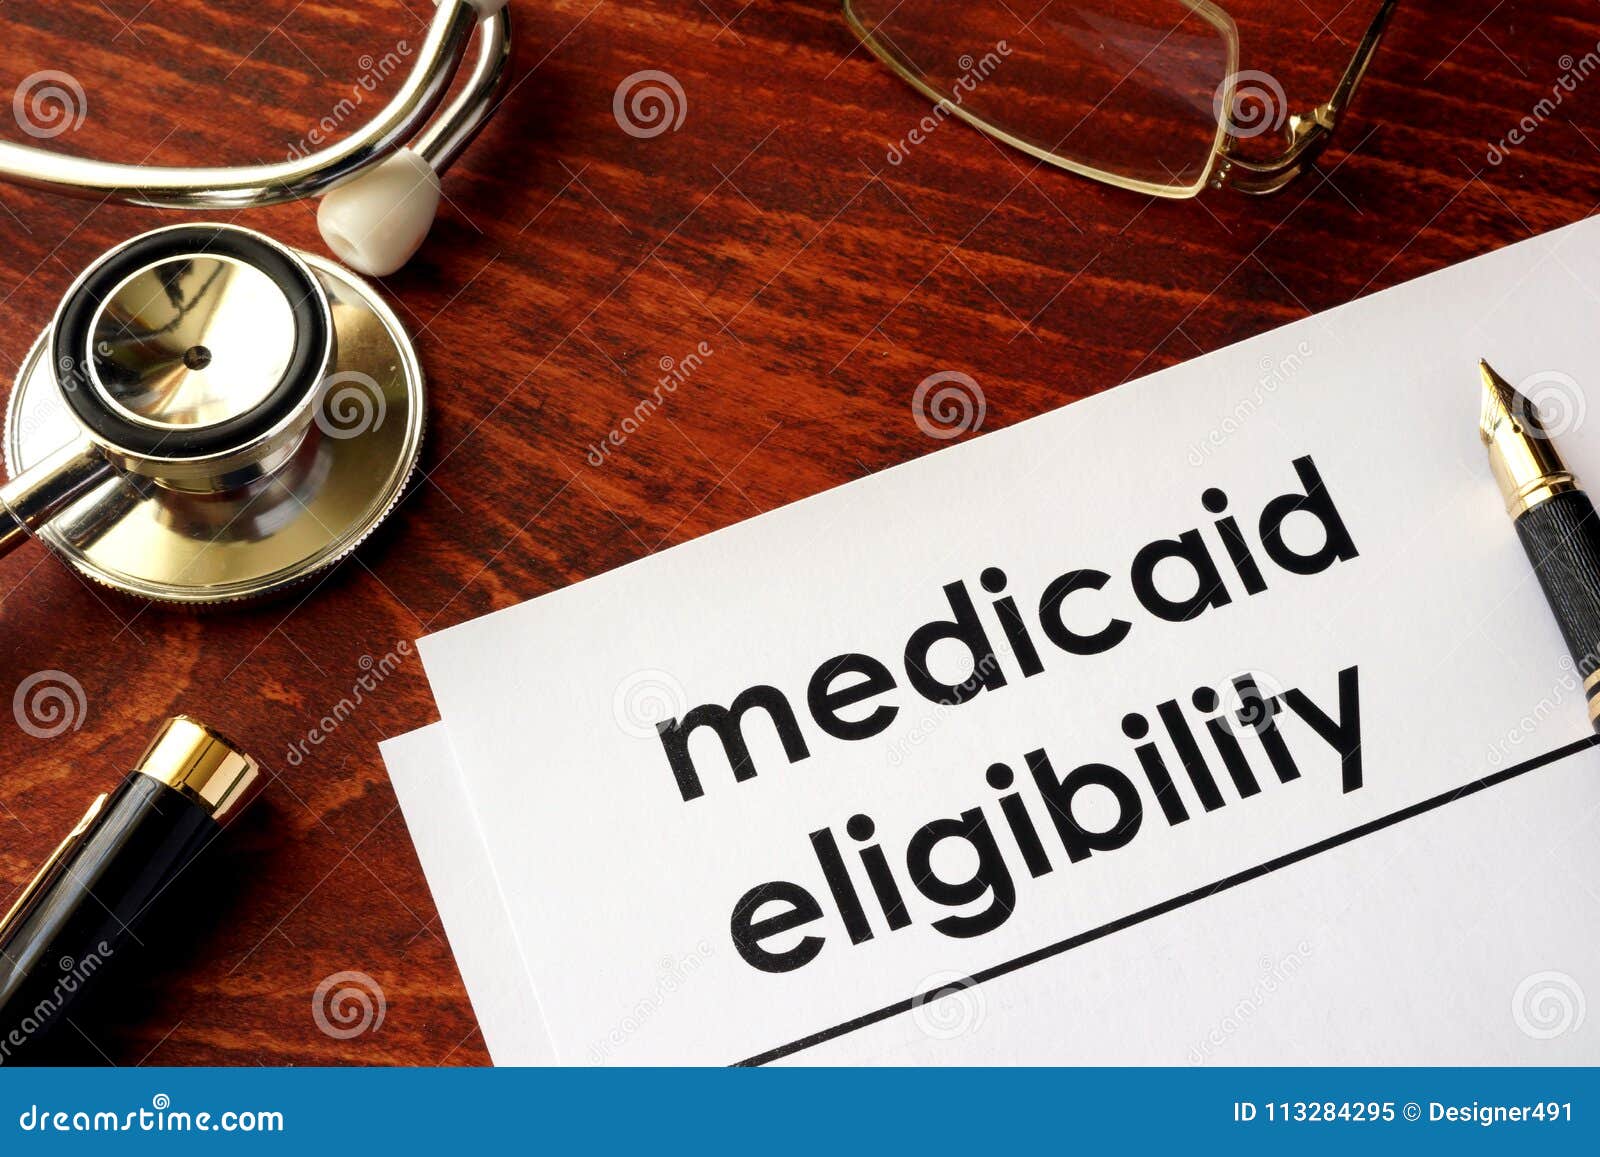 document with title medicaid eligibility.